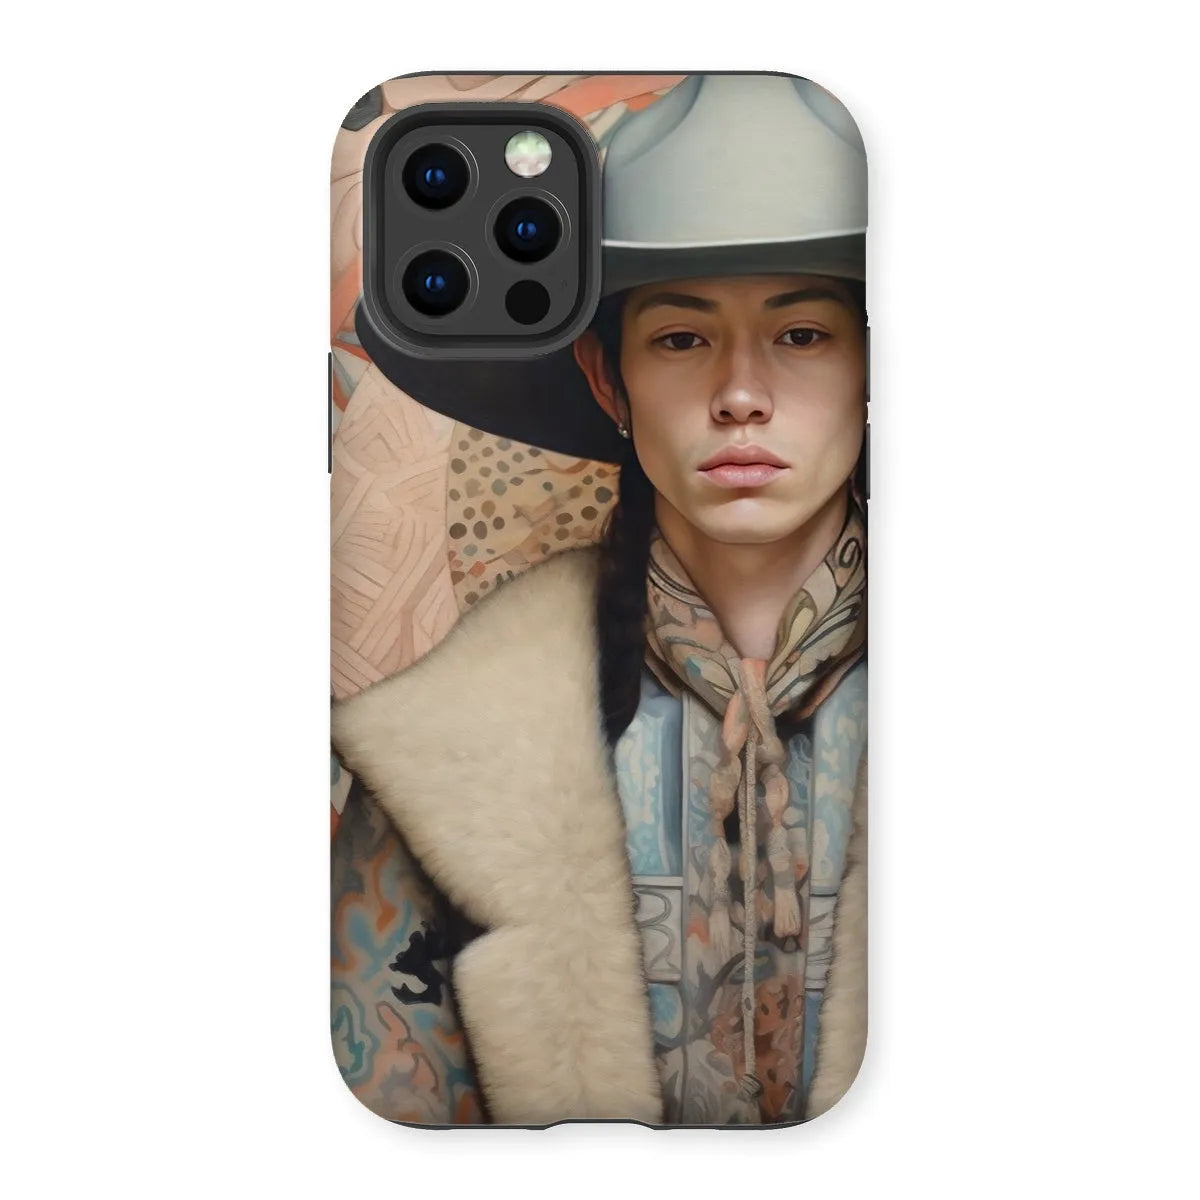 Jacy The Gay Cowboy - Dandy Gay Aesthetic Art Phone Case - Iphone 12 Pro / Matte - Mobile Phone Cases - Aesthetic Art